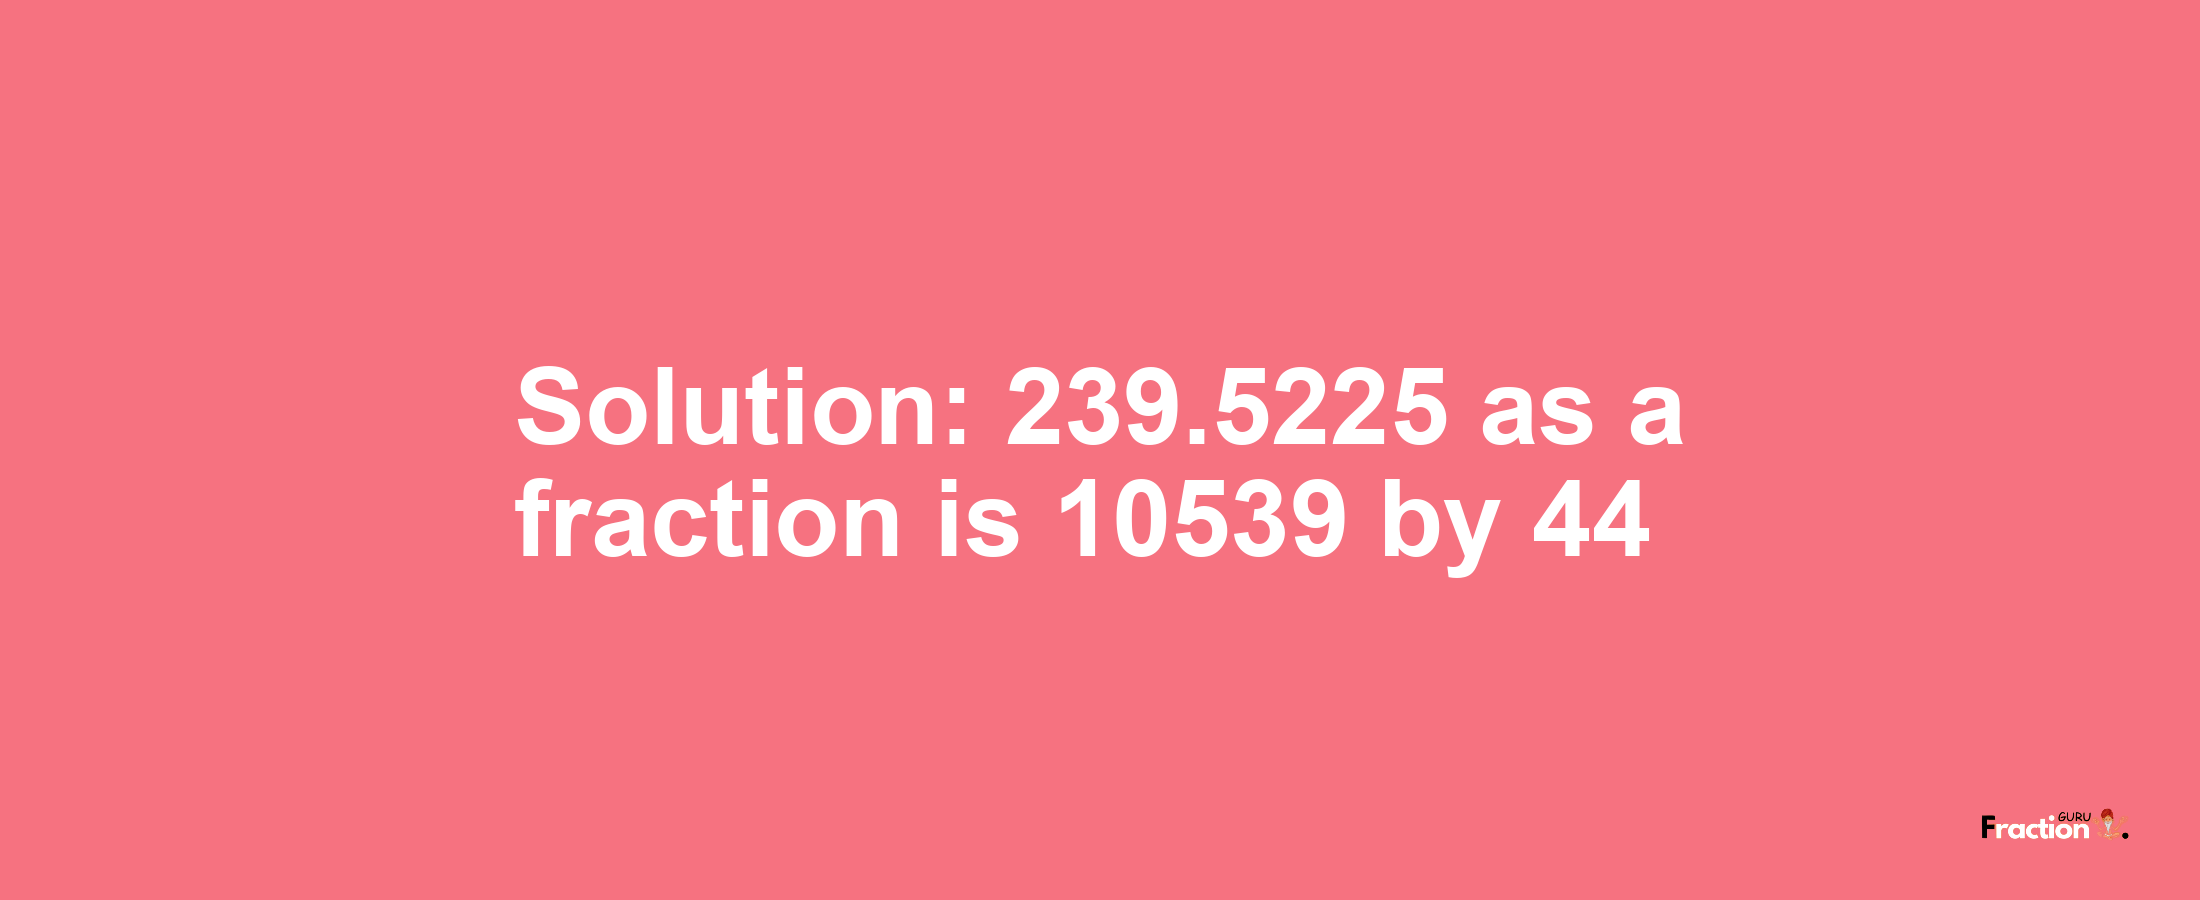 Solution:239.5225 as a fraction is 10539/44